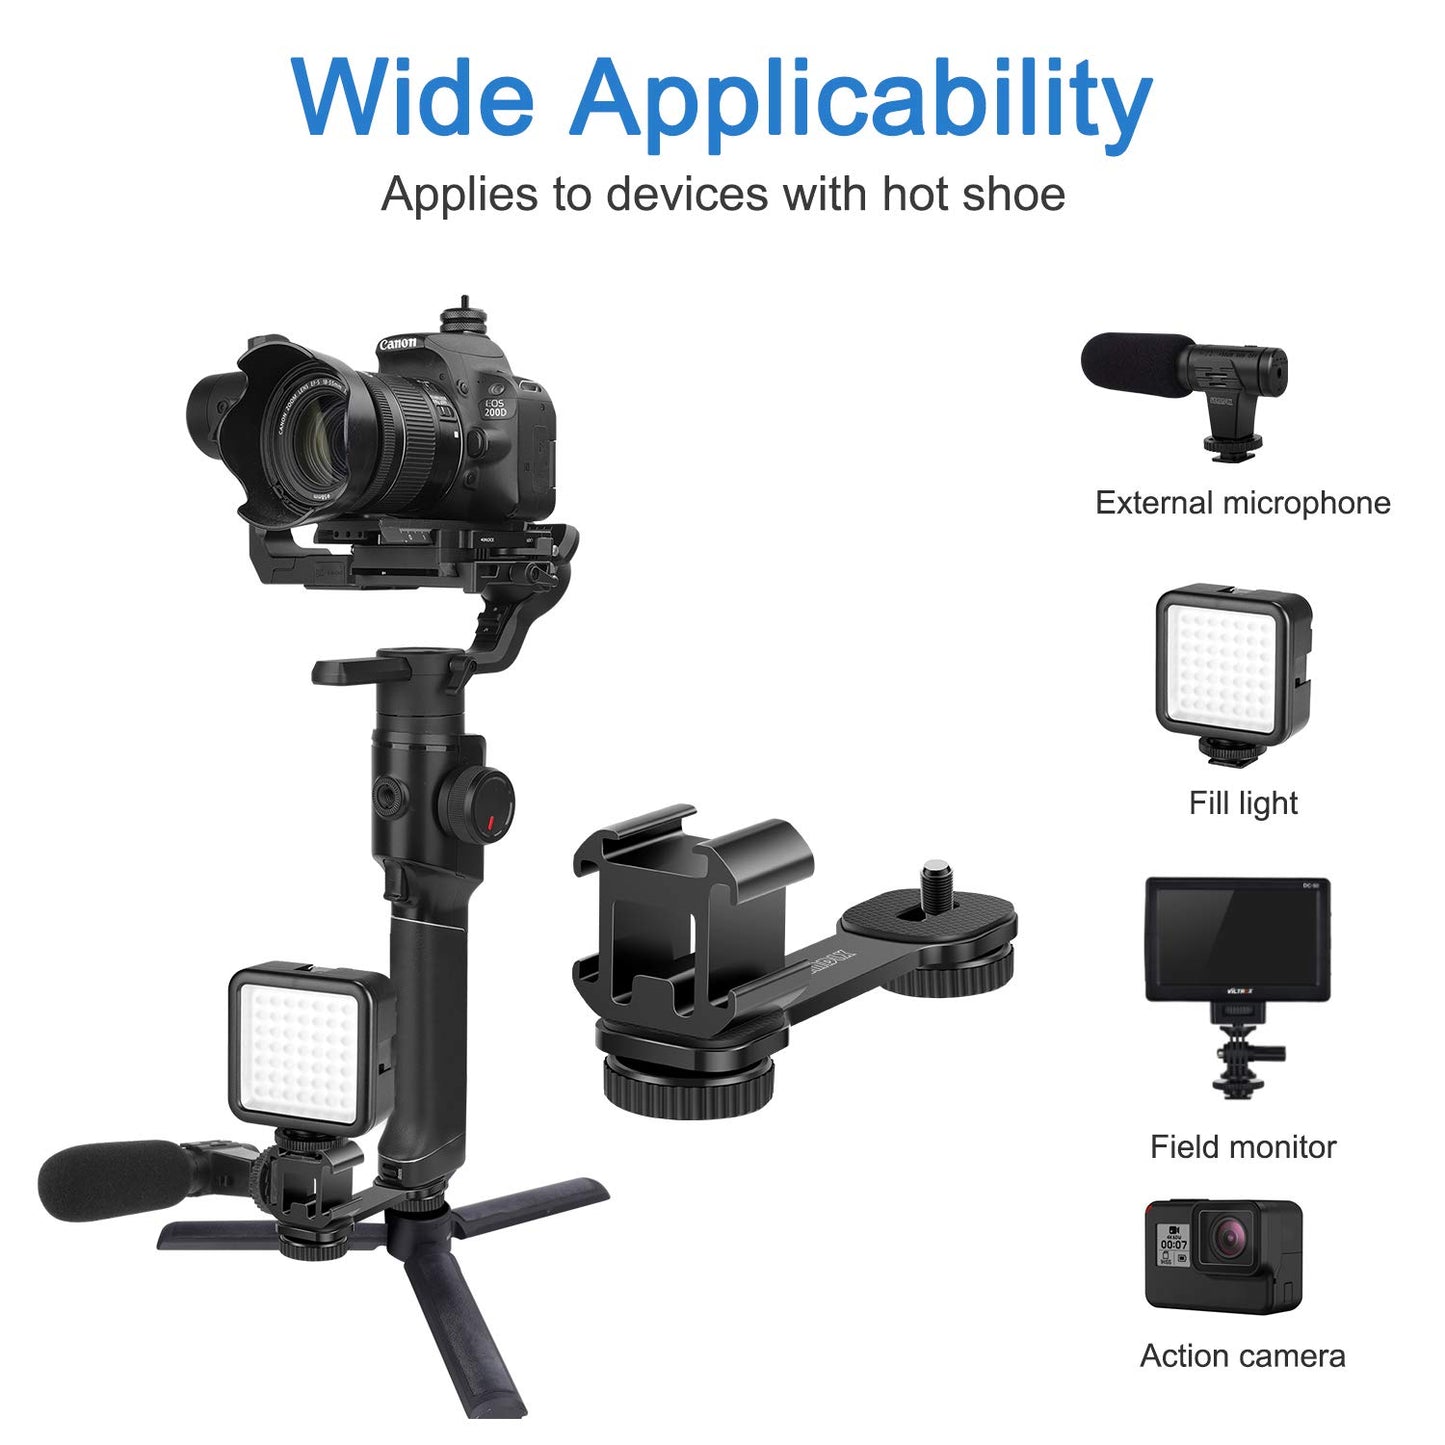 SZMDLX Triple Cold Shoe Camera Expansion Bracket Set with 1/4 inch Adapter, hot Shoe Adapter, Suitable for Camera, Microphone, LED Display, Video Recorder, Flash, Video Camera